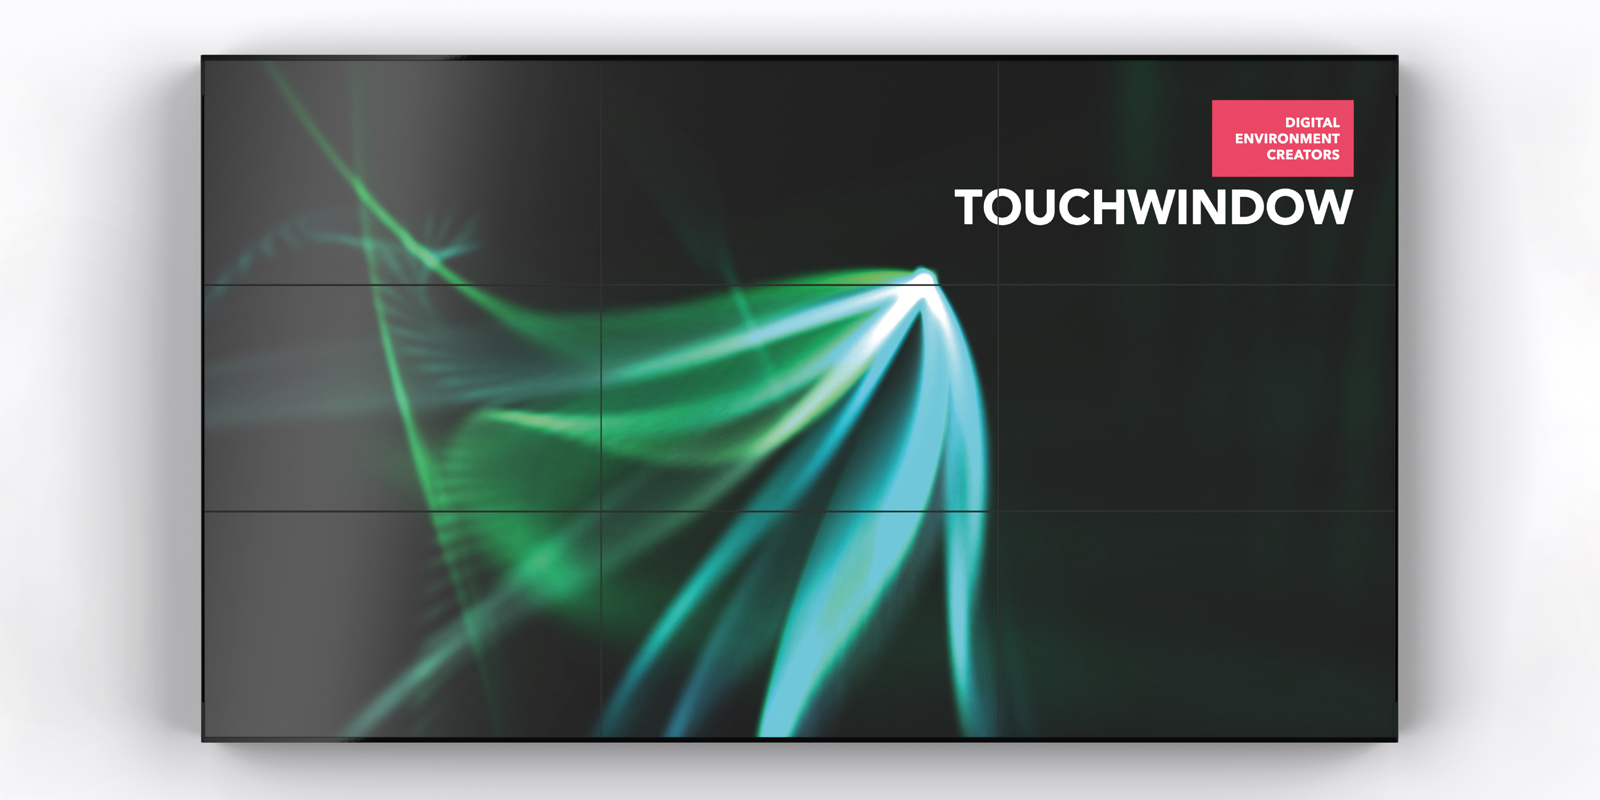 Touchwindow video-wall